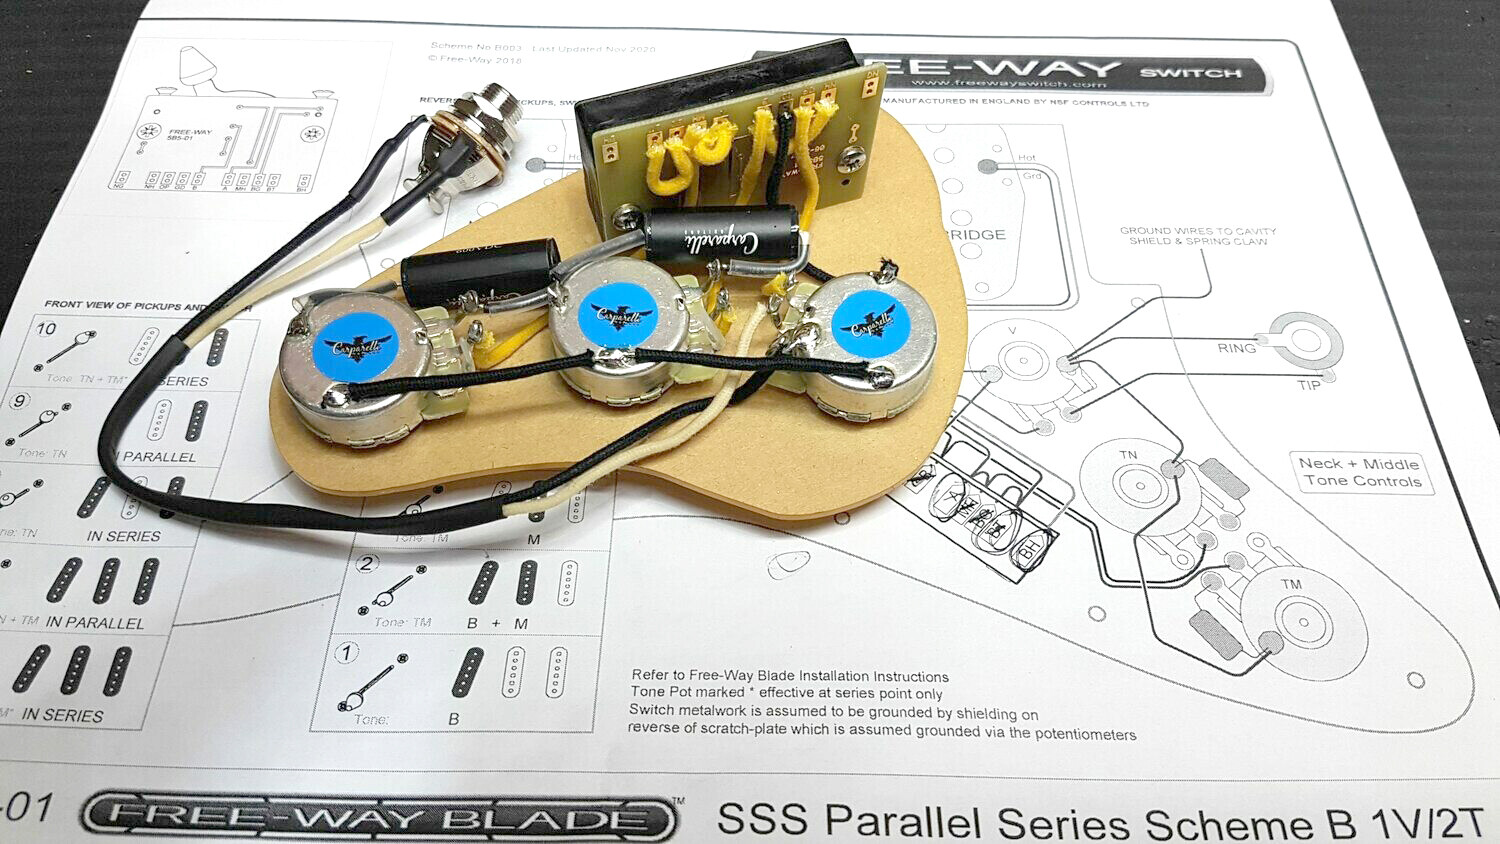 Carparelli - 5B5-01 FREEWAY SWITCH LOADED PRE-WIRED SSS Parallel